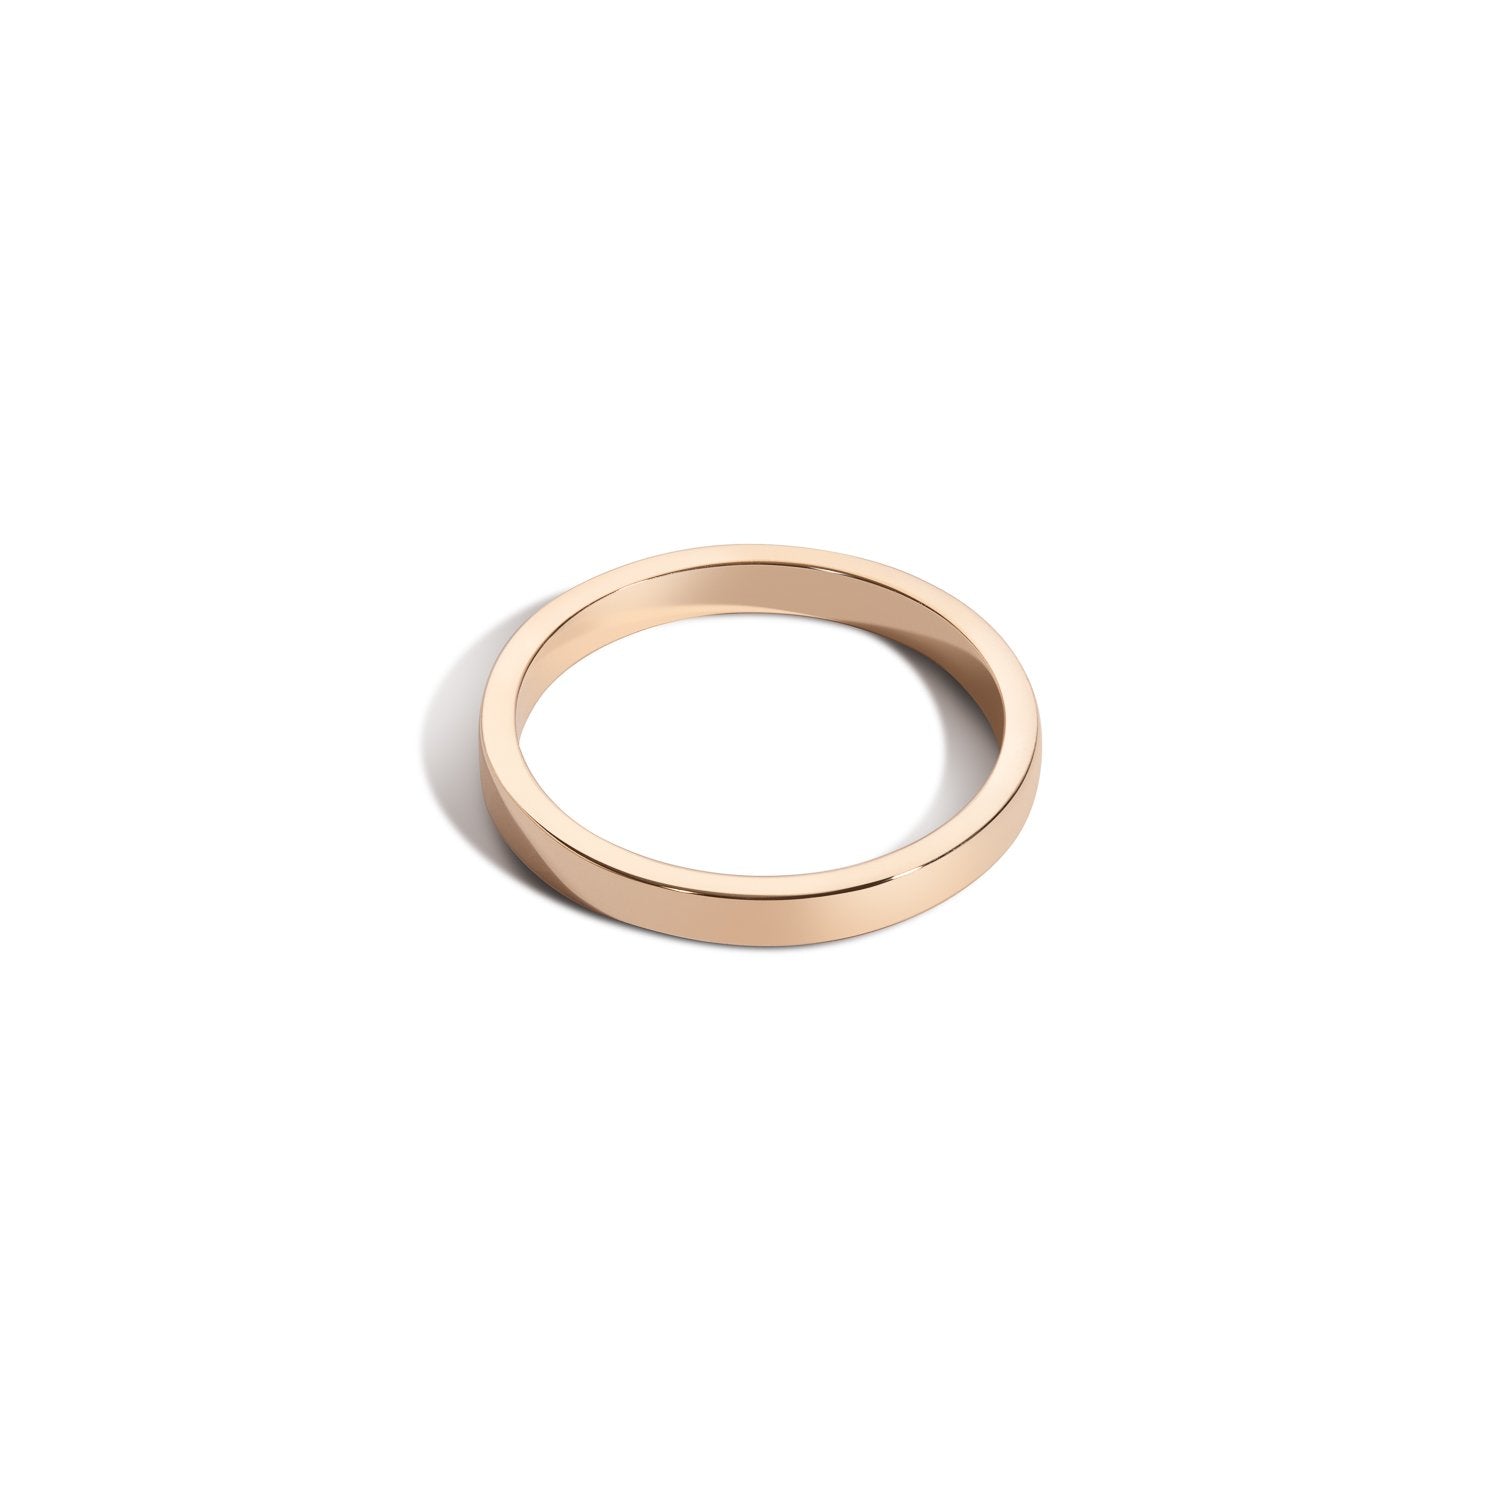 IN STOCK 18K Yellow Gold 2.2mm x 1.3mm Gold Band - Size 6